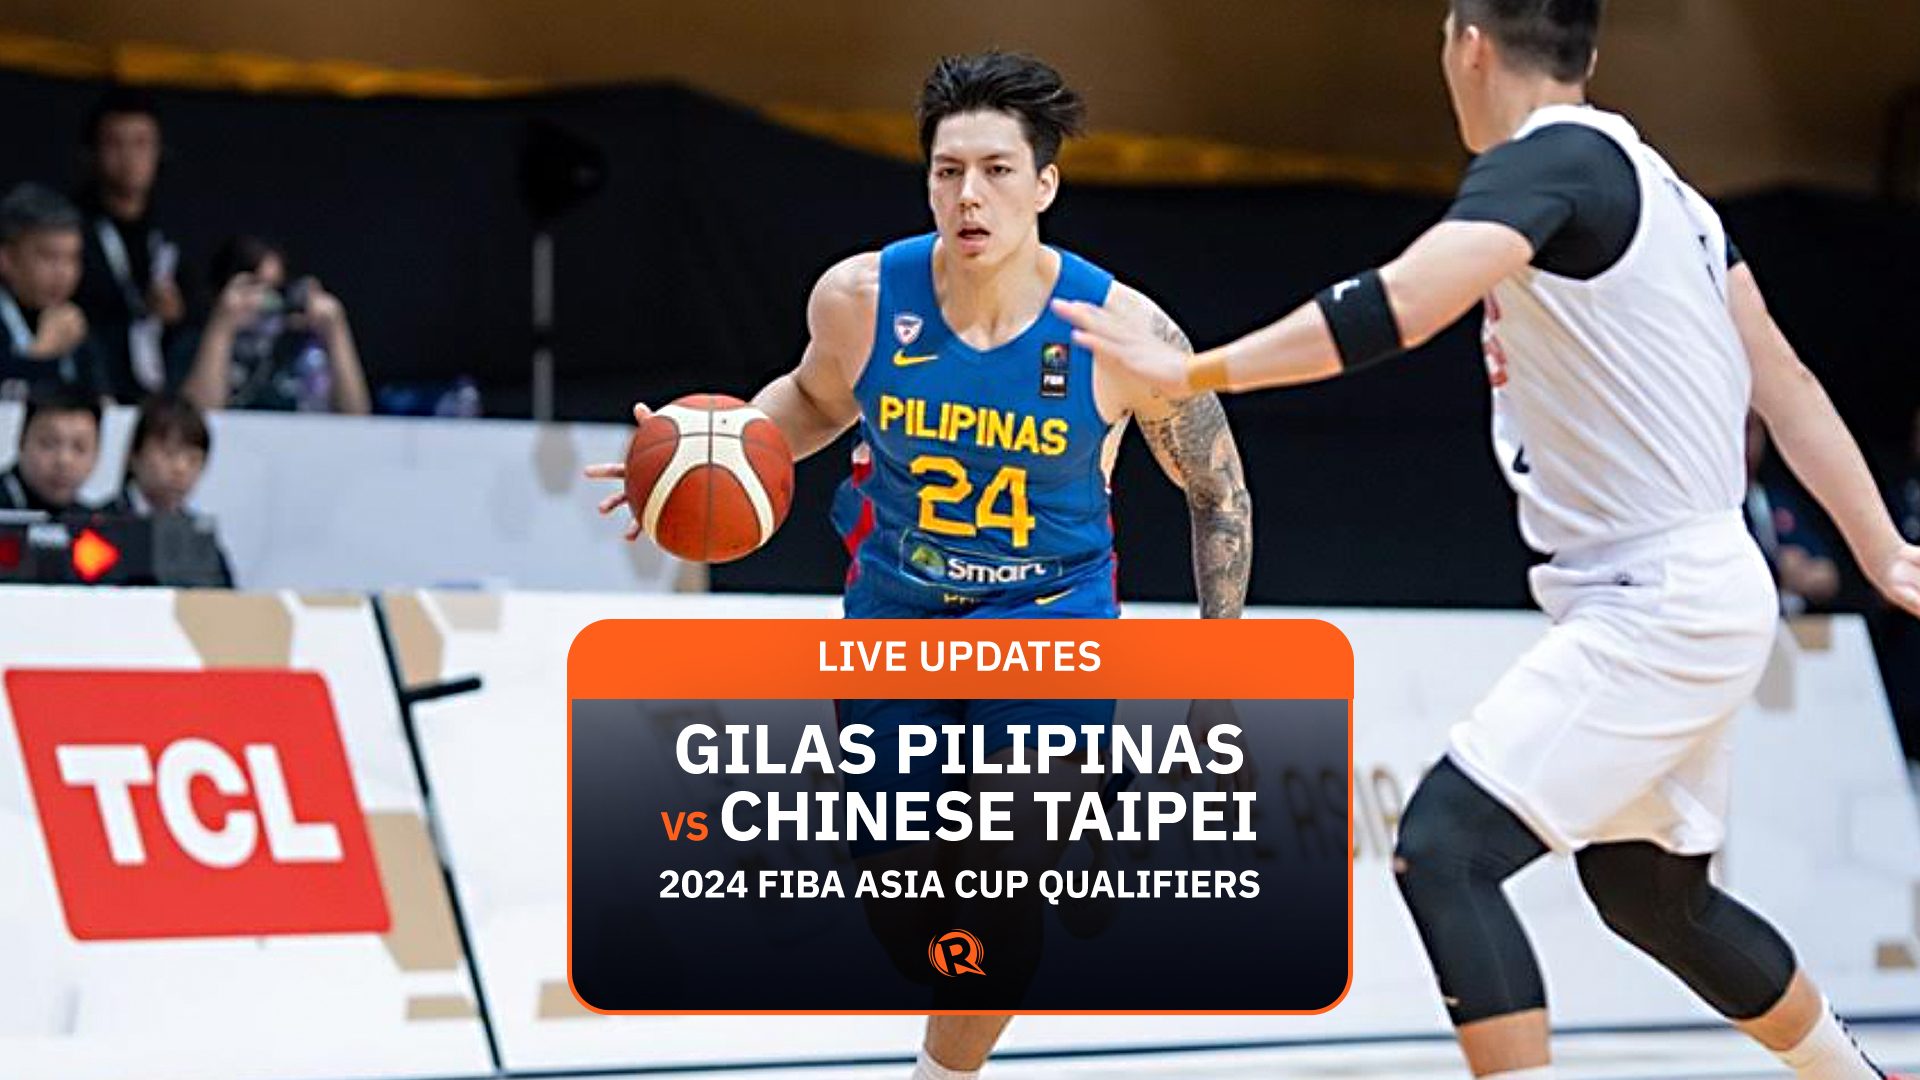 LIVE UPDATES: Philippines vs Chinese Taipei – FIBA Asia Cup Qualifiers